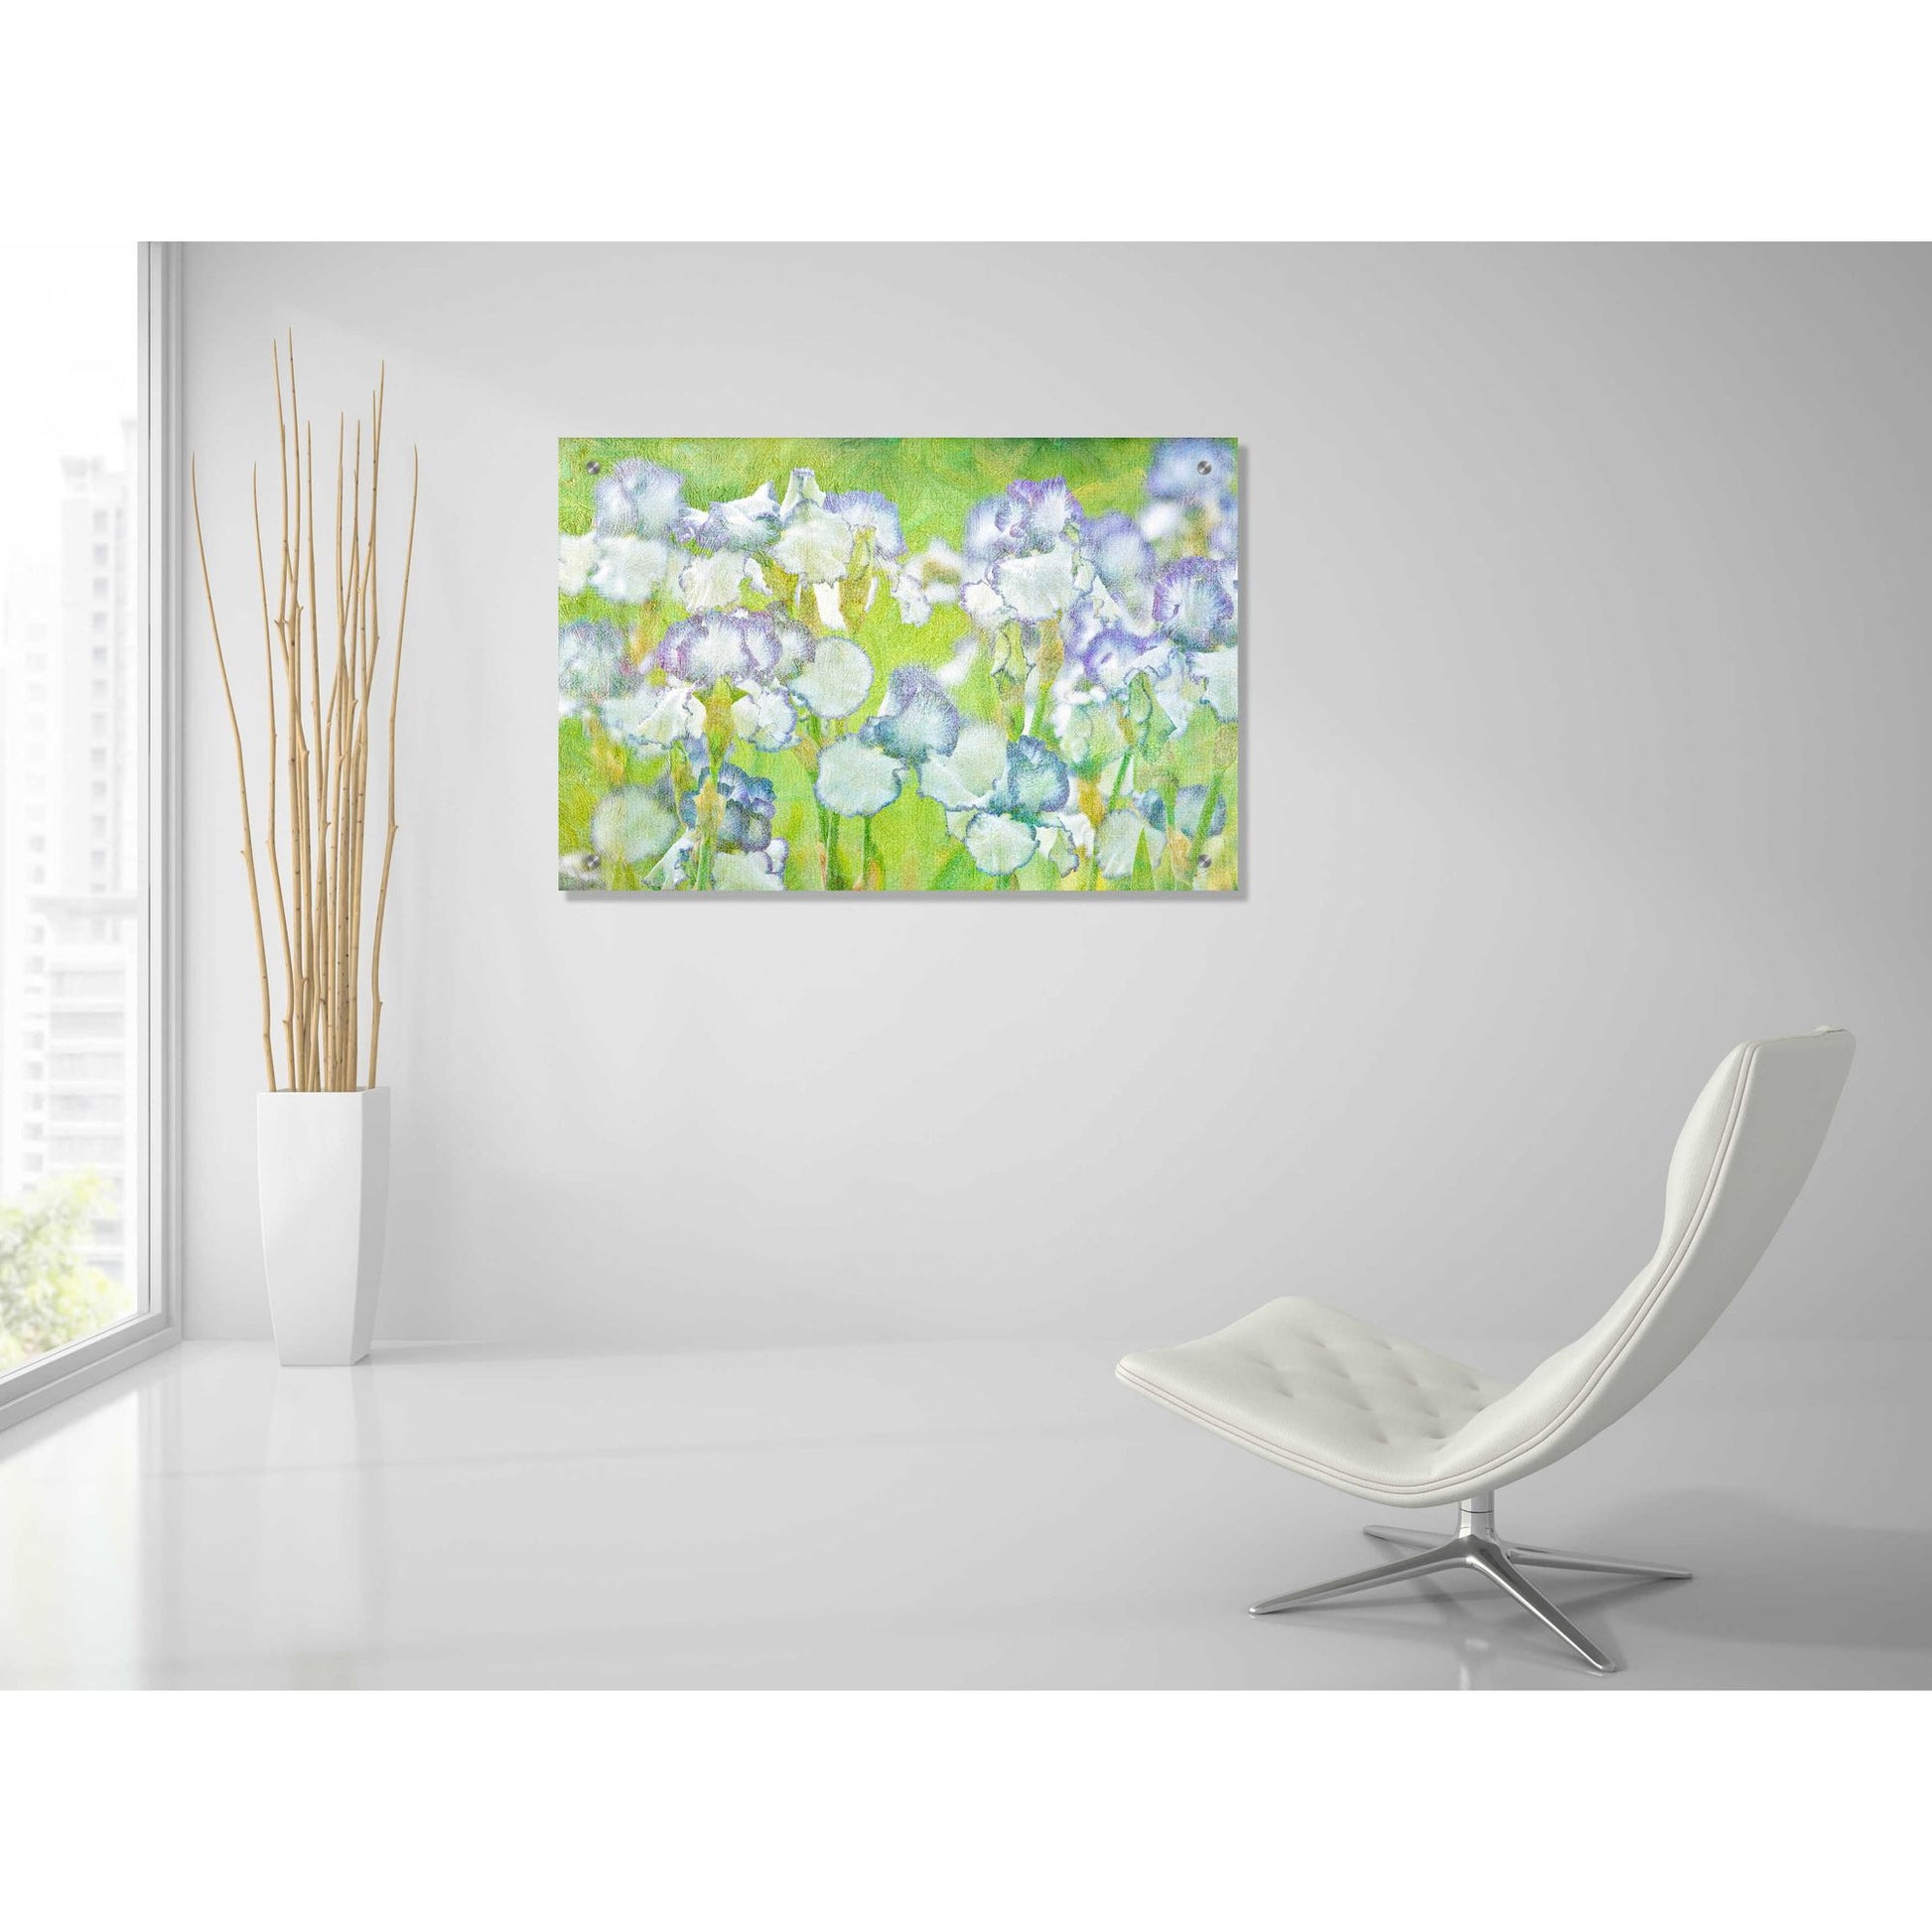 Epic Art 'Lime Floral' by Dennis Frates, Acrylic Glass Wall Art,36x24